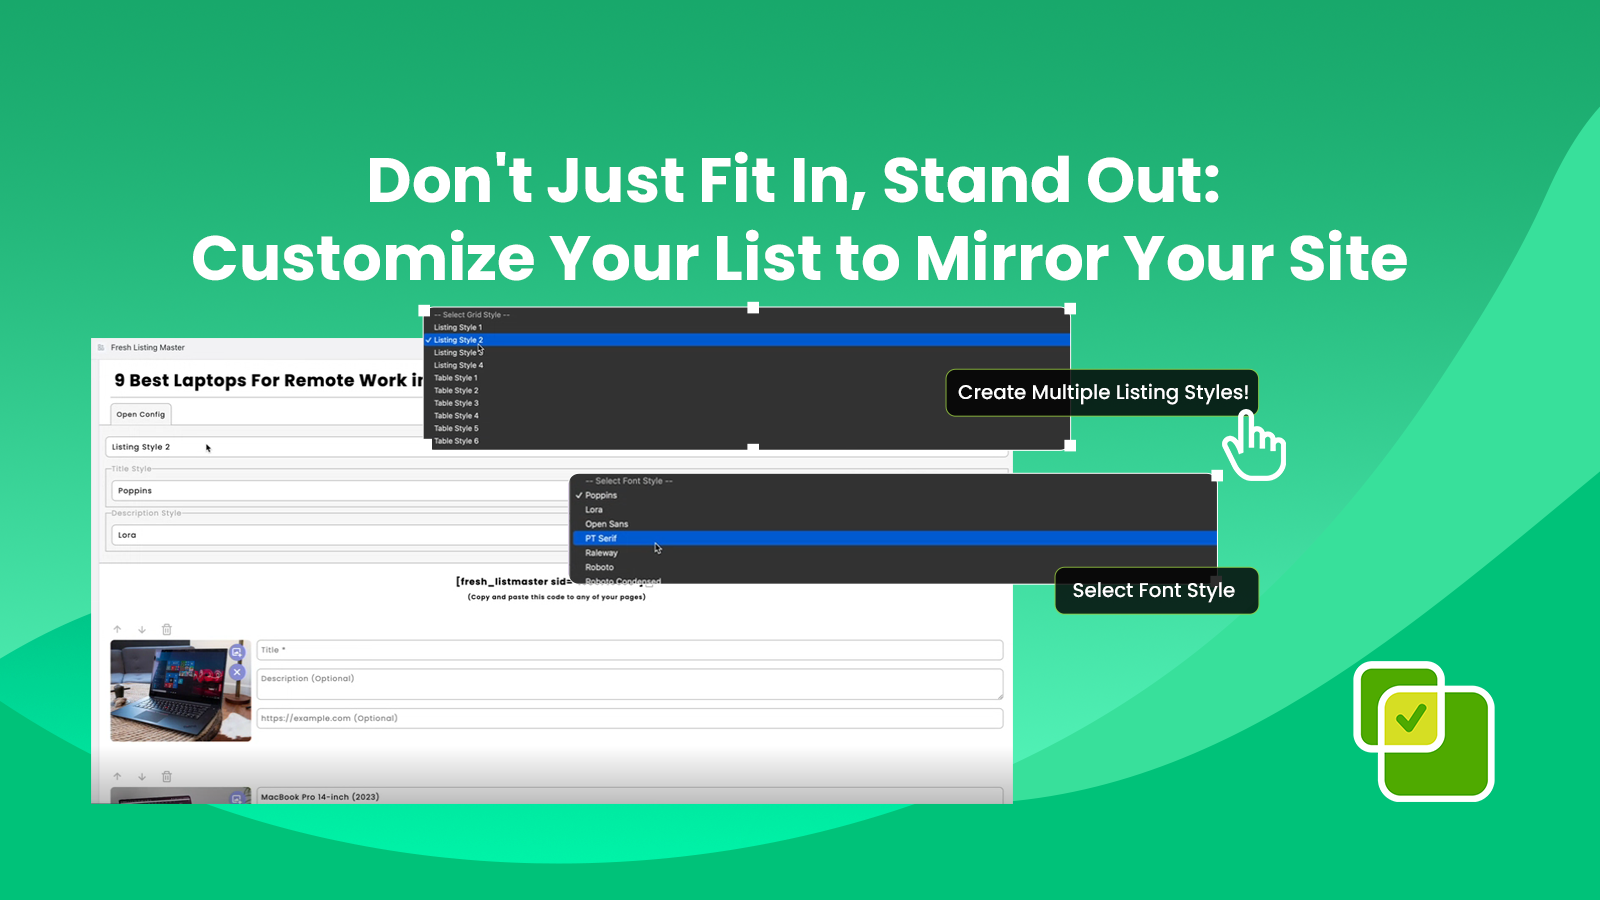 Stand Out: Customize Your List to Fit Your Site